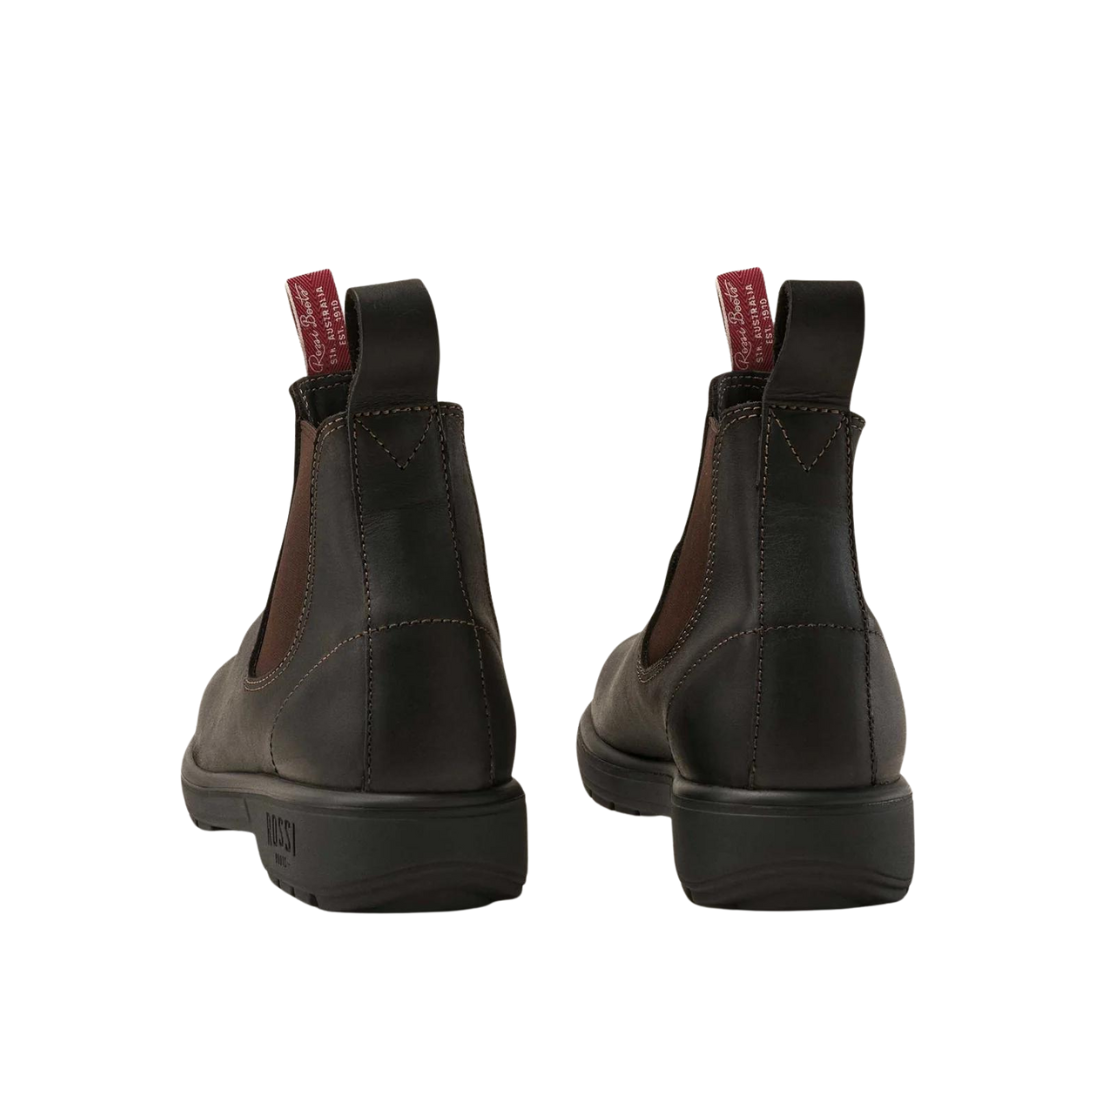 Rossi 303 Endura Pull-on Workboot Claret Workboots by Rossi | The Bloke Shop